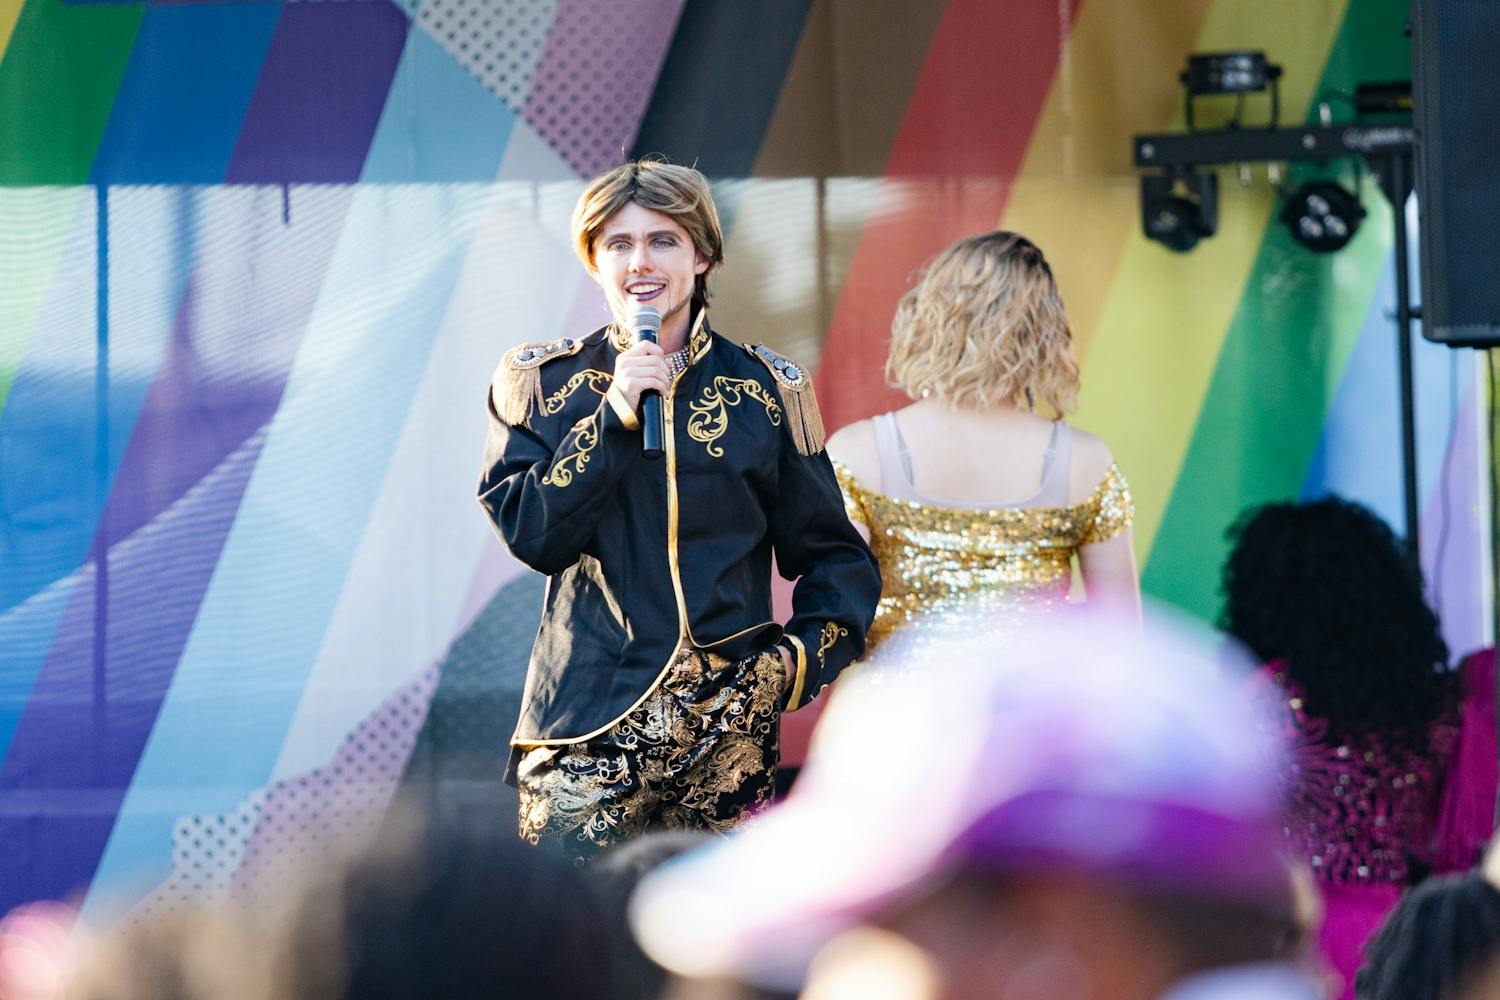 A drag king walks across the stage in an attempt to win the title of Mr. Outfest 2022 on June 4, 2022. Outfest featured performances, food and vendors in honor of Pride month.